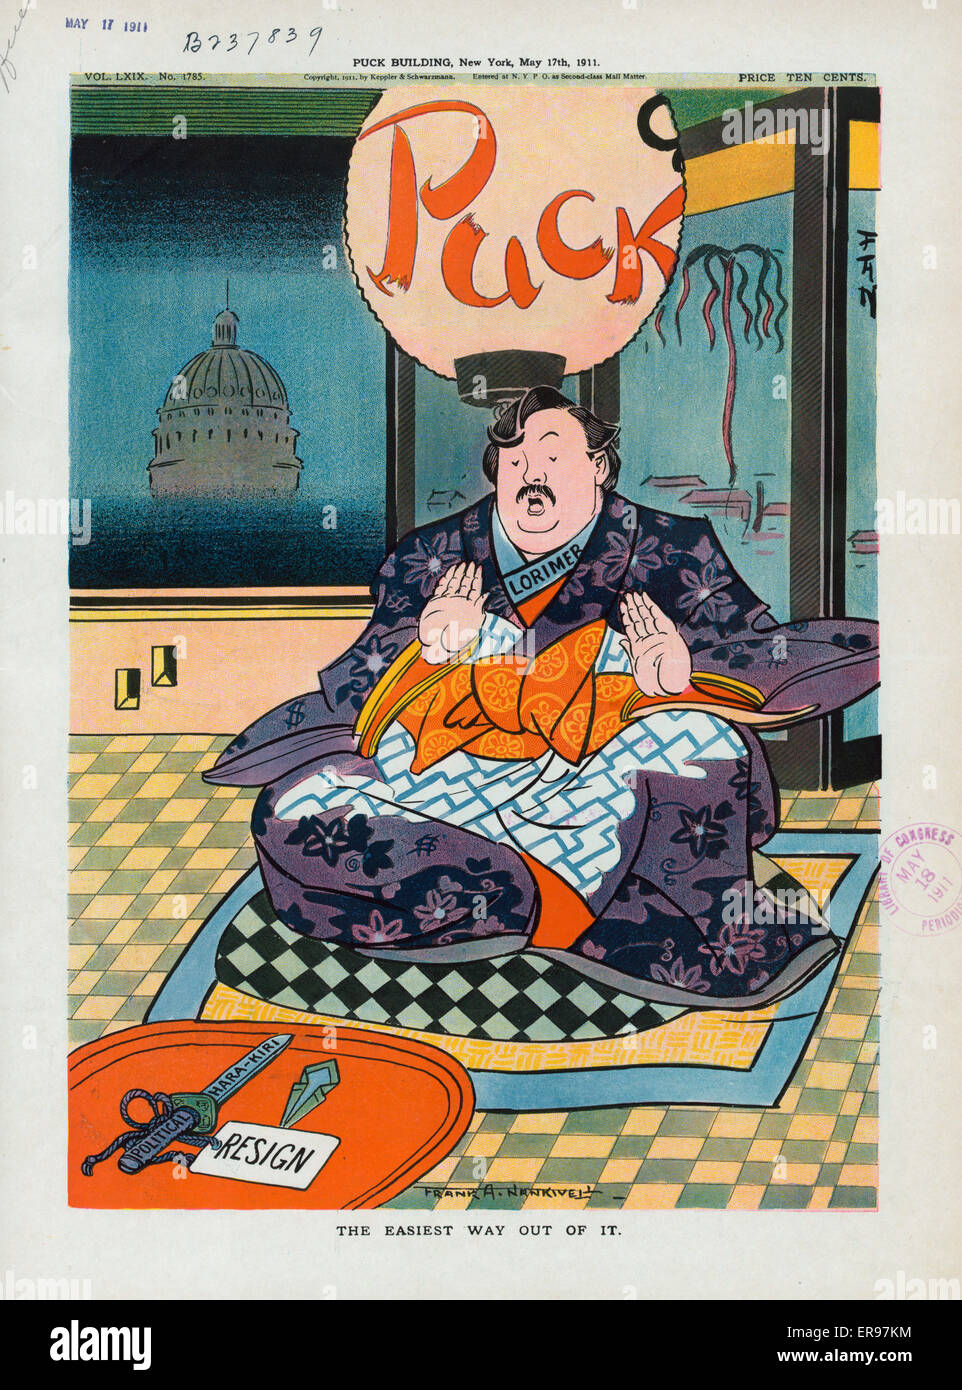 The easiest way out of it. Illustration shows Senator William Lorimer, seated, wearing a kimono, with both hands raised, suggesting that he will not consider Political Hara-Kiri and will not Resign as ways to resolve his political crisis. Date 1911 May 17 Stock Photo